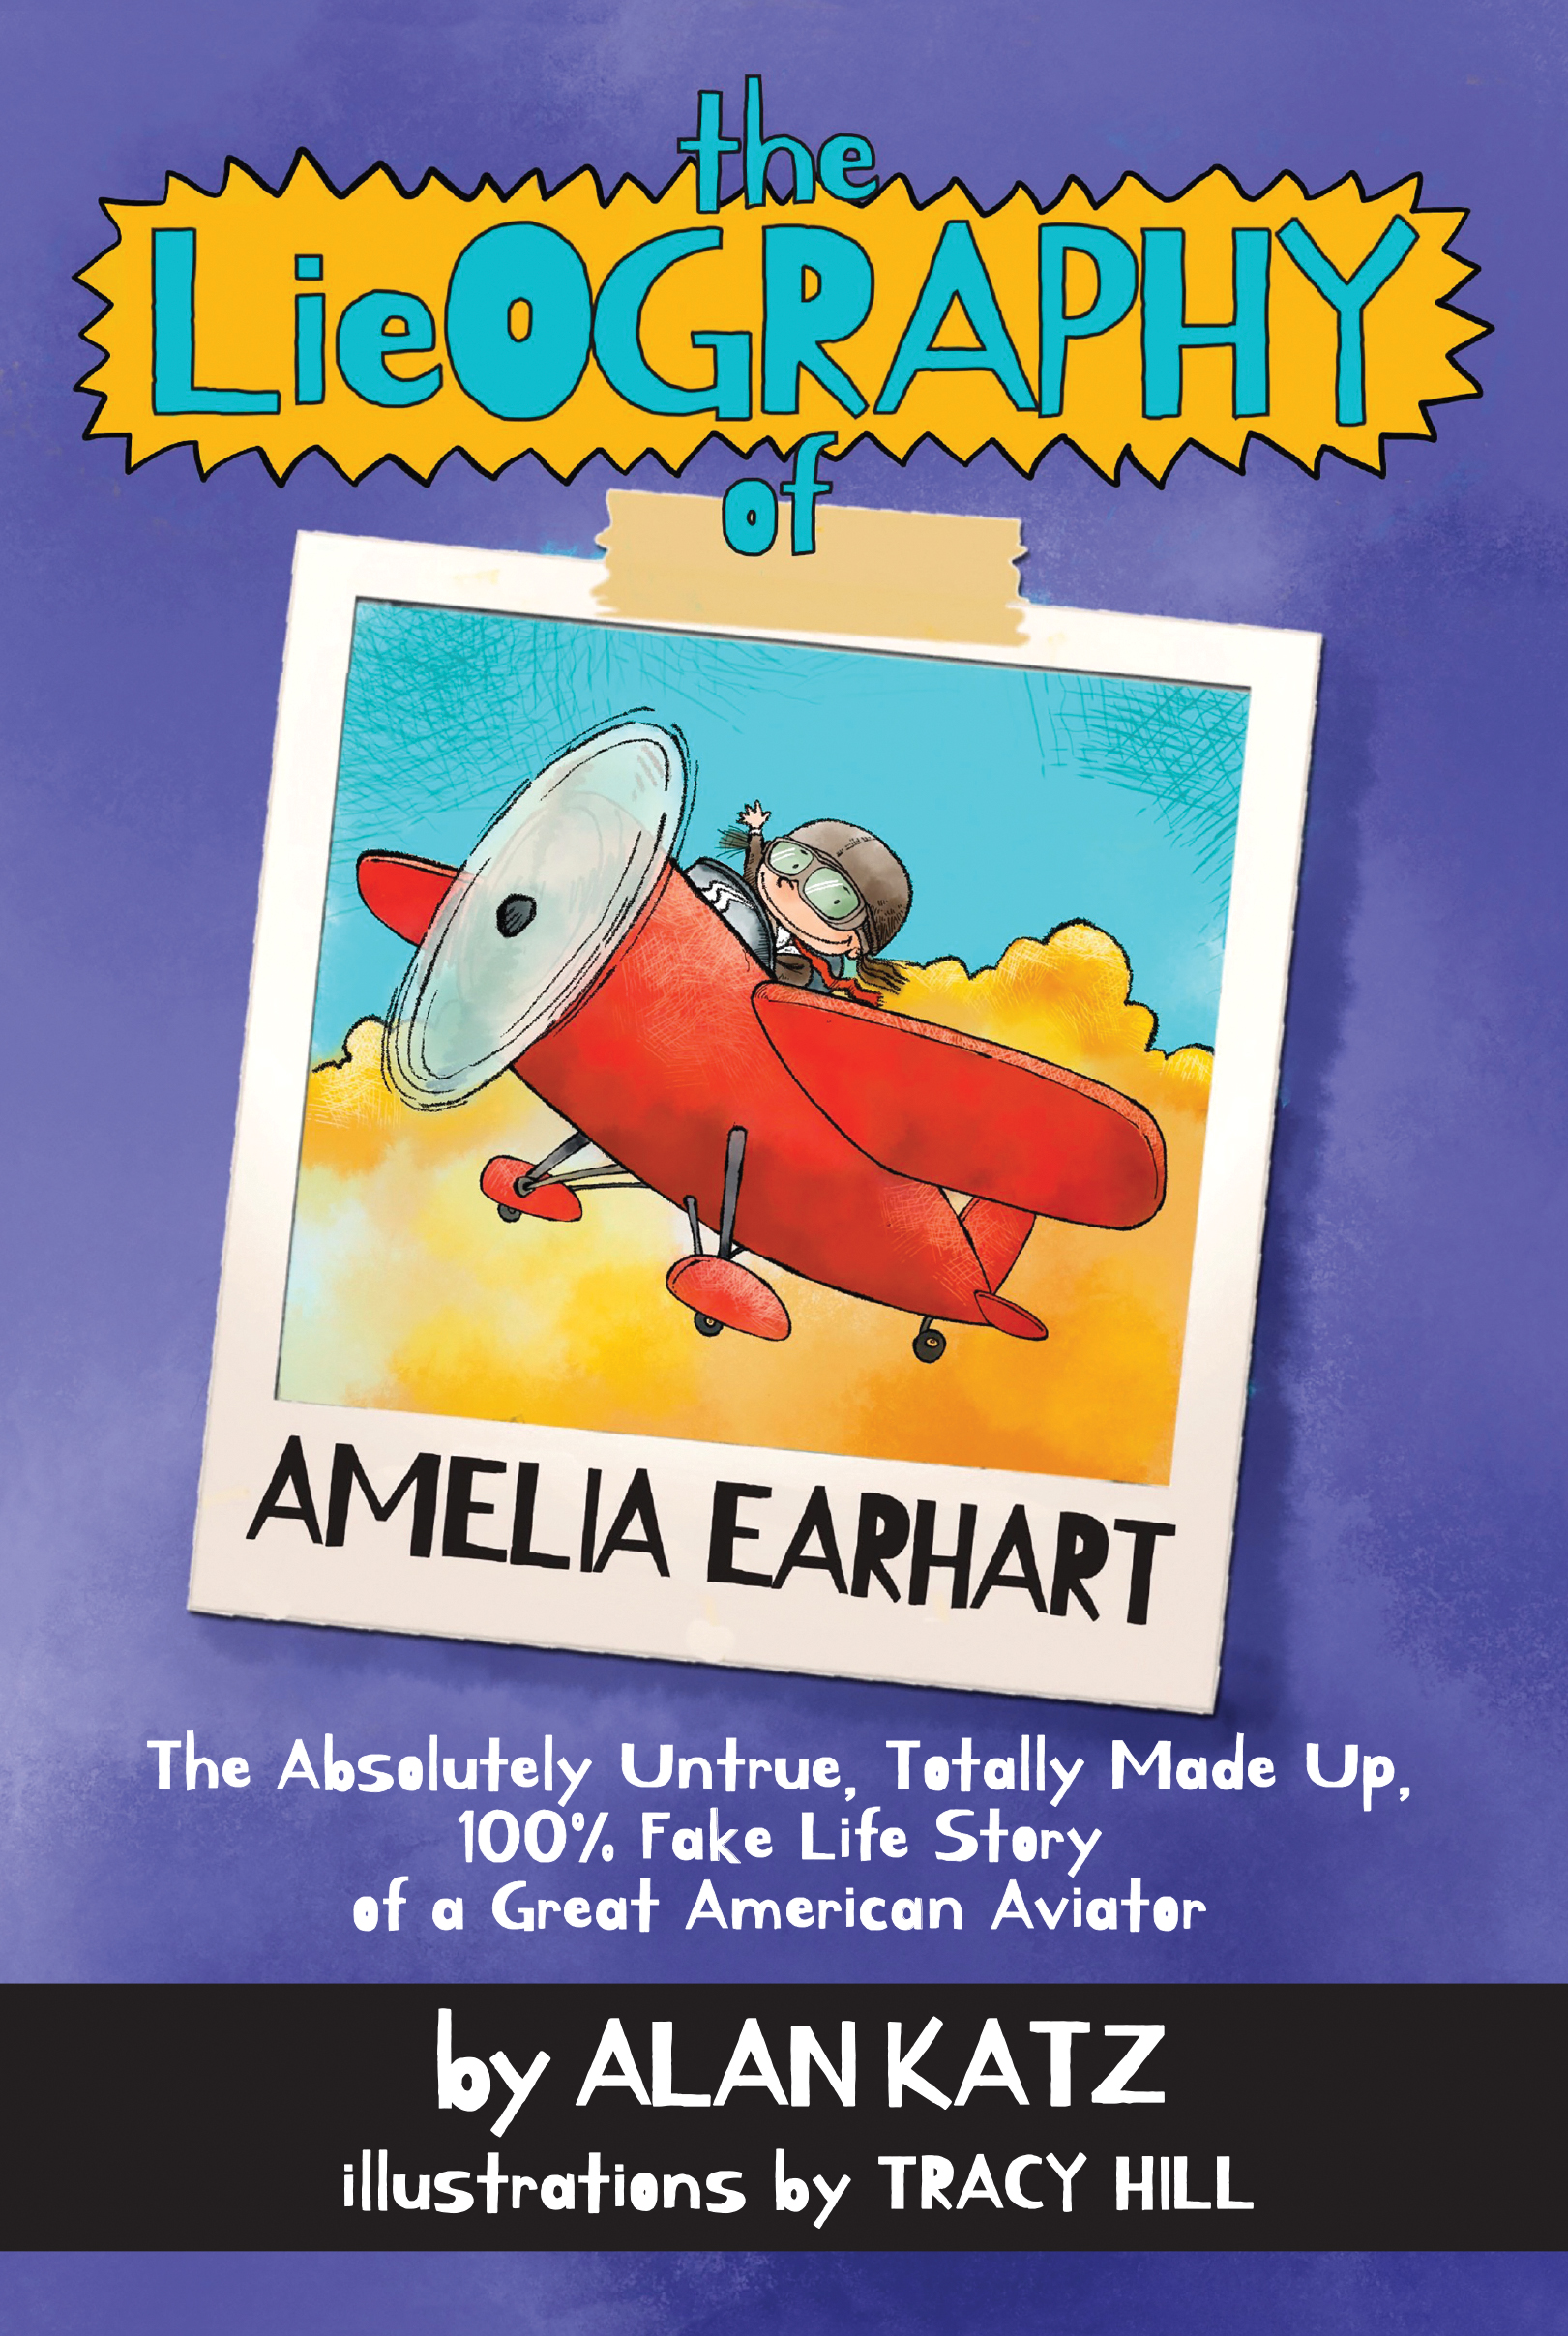 Book cover for The LieOGRAPHY of Amelia Earhart by Alan Katz